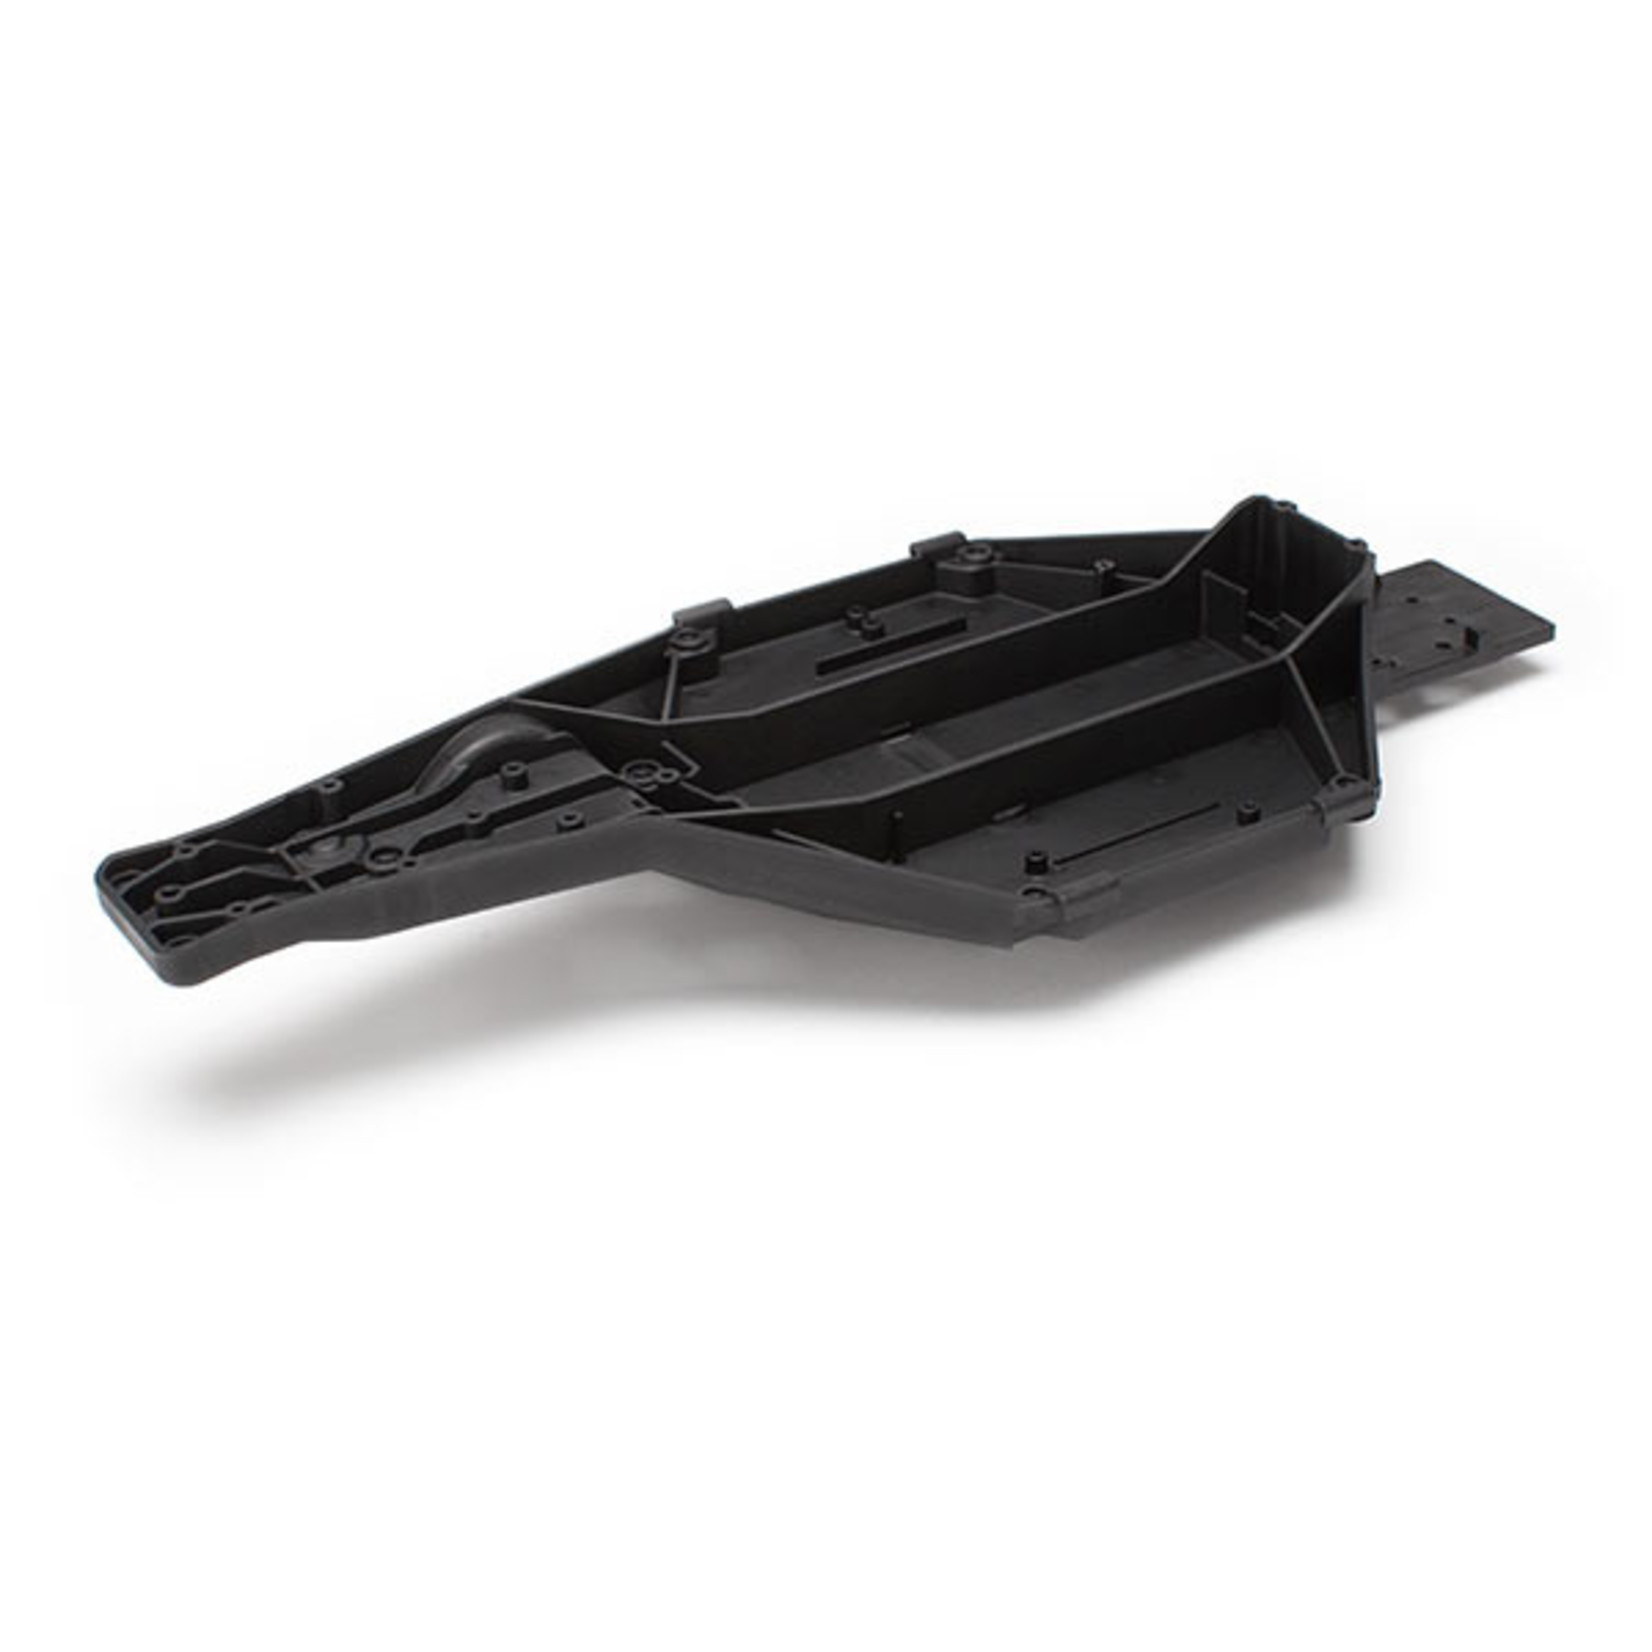 Traxxas 5832 - Chassis, low CG (black)